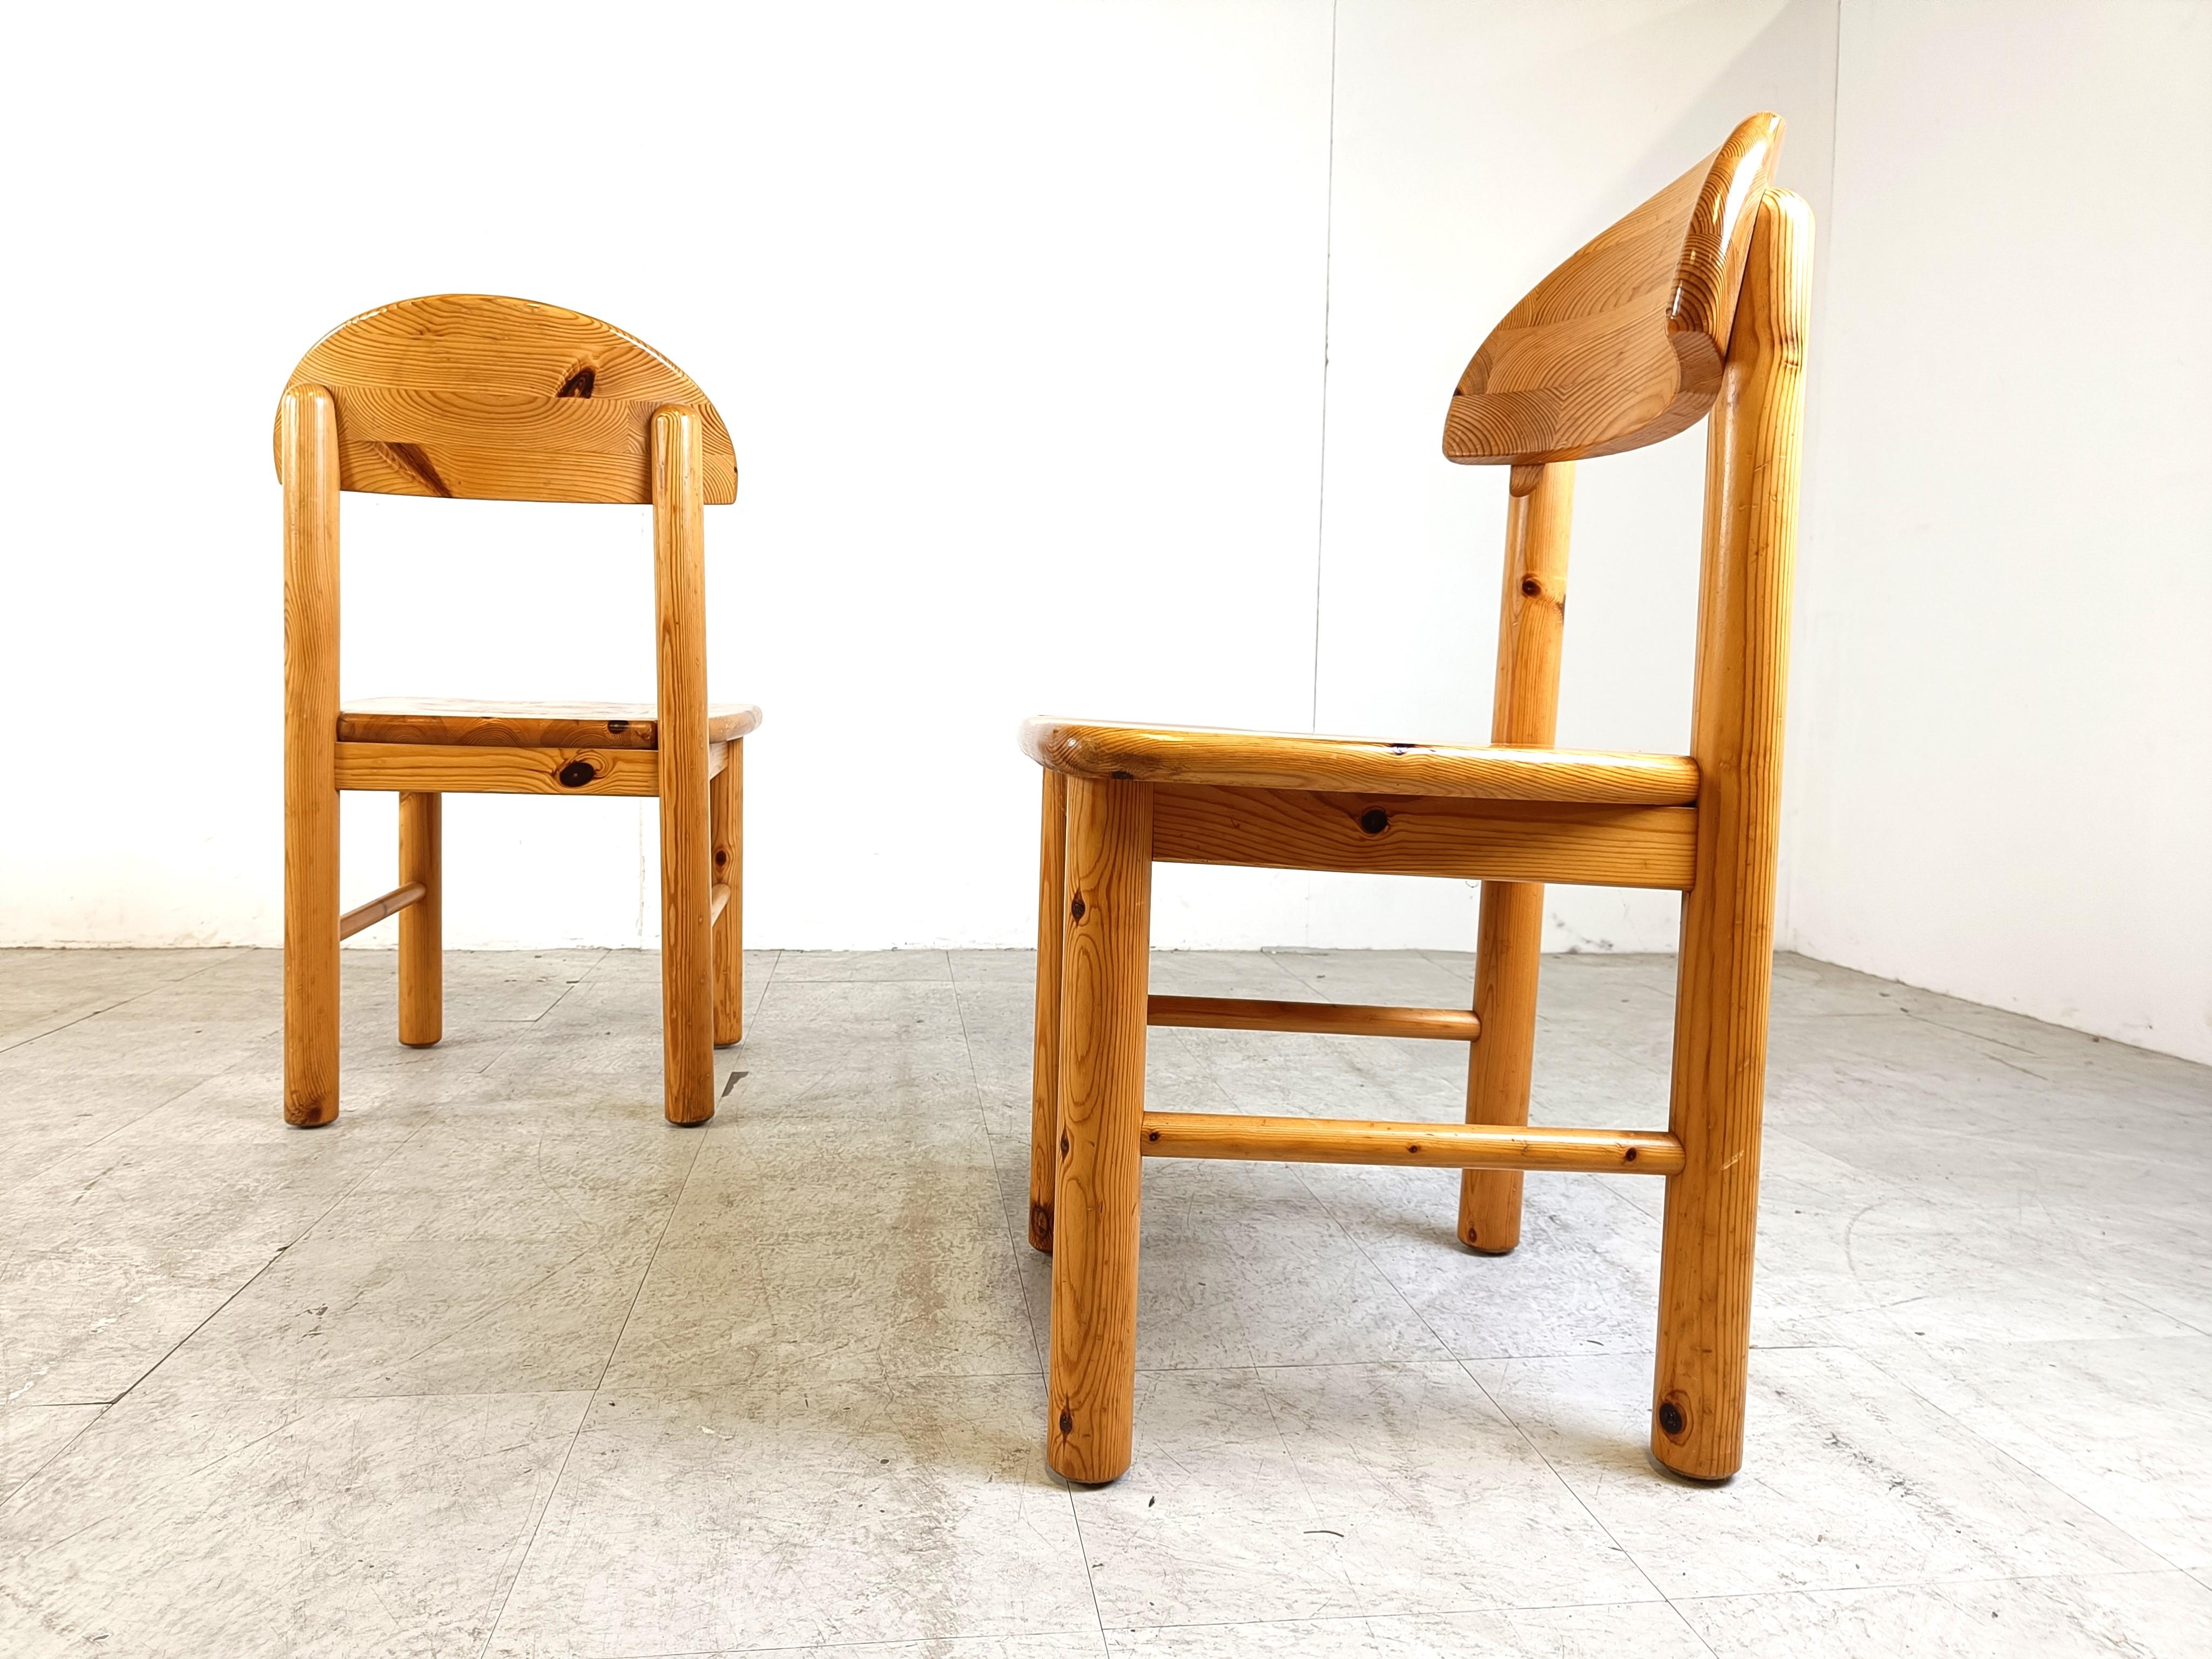 Pine Vintage pine wood dining chairs, 1980s - set of 6 